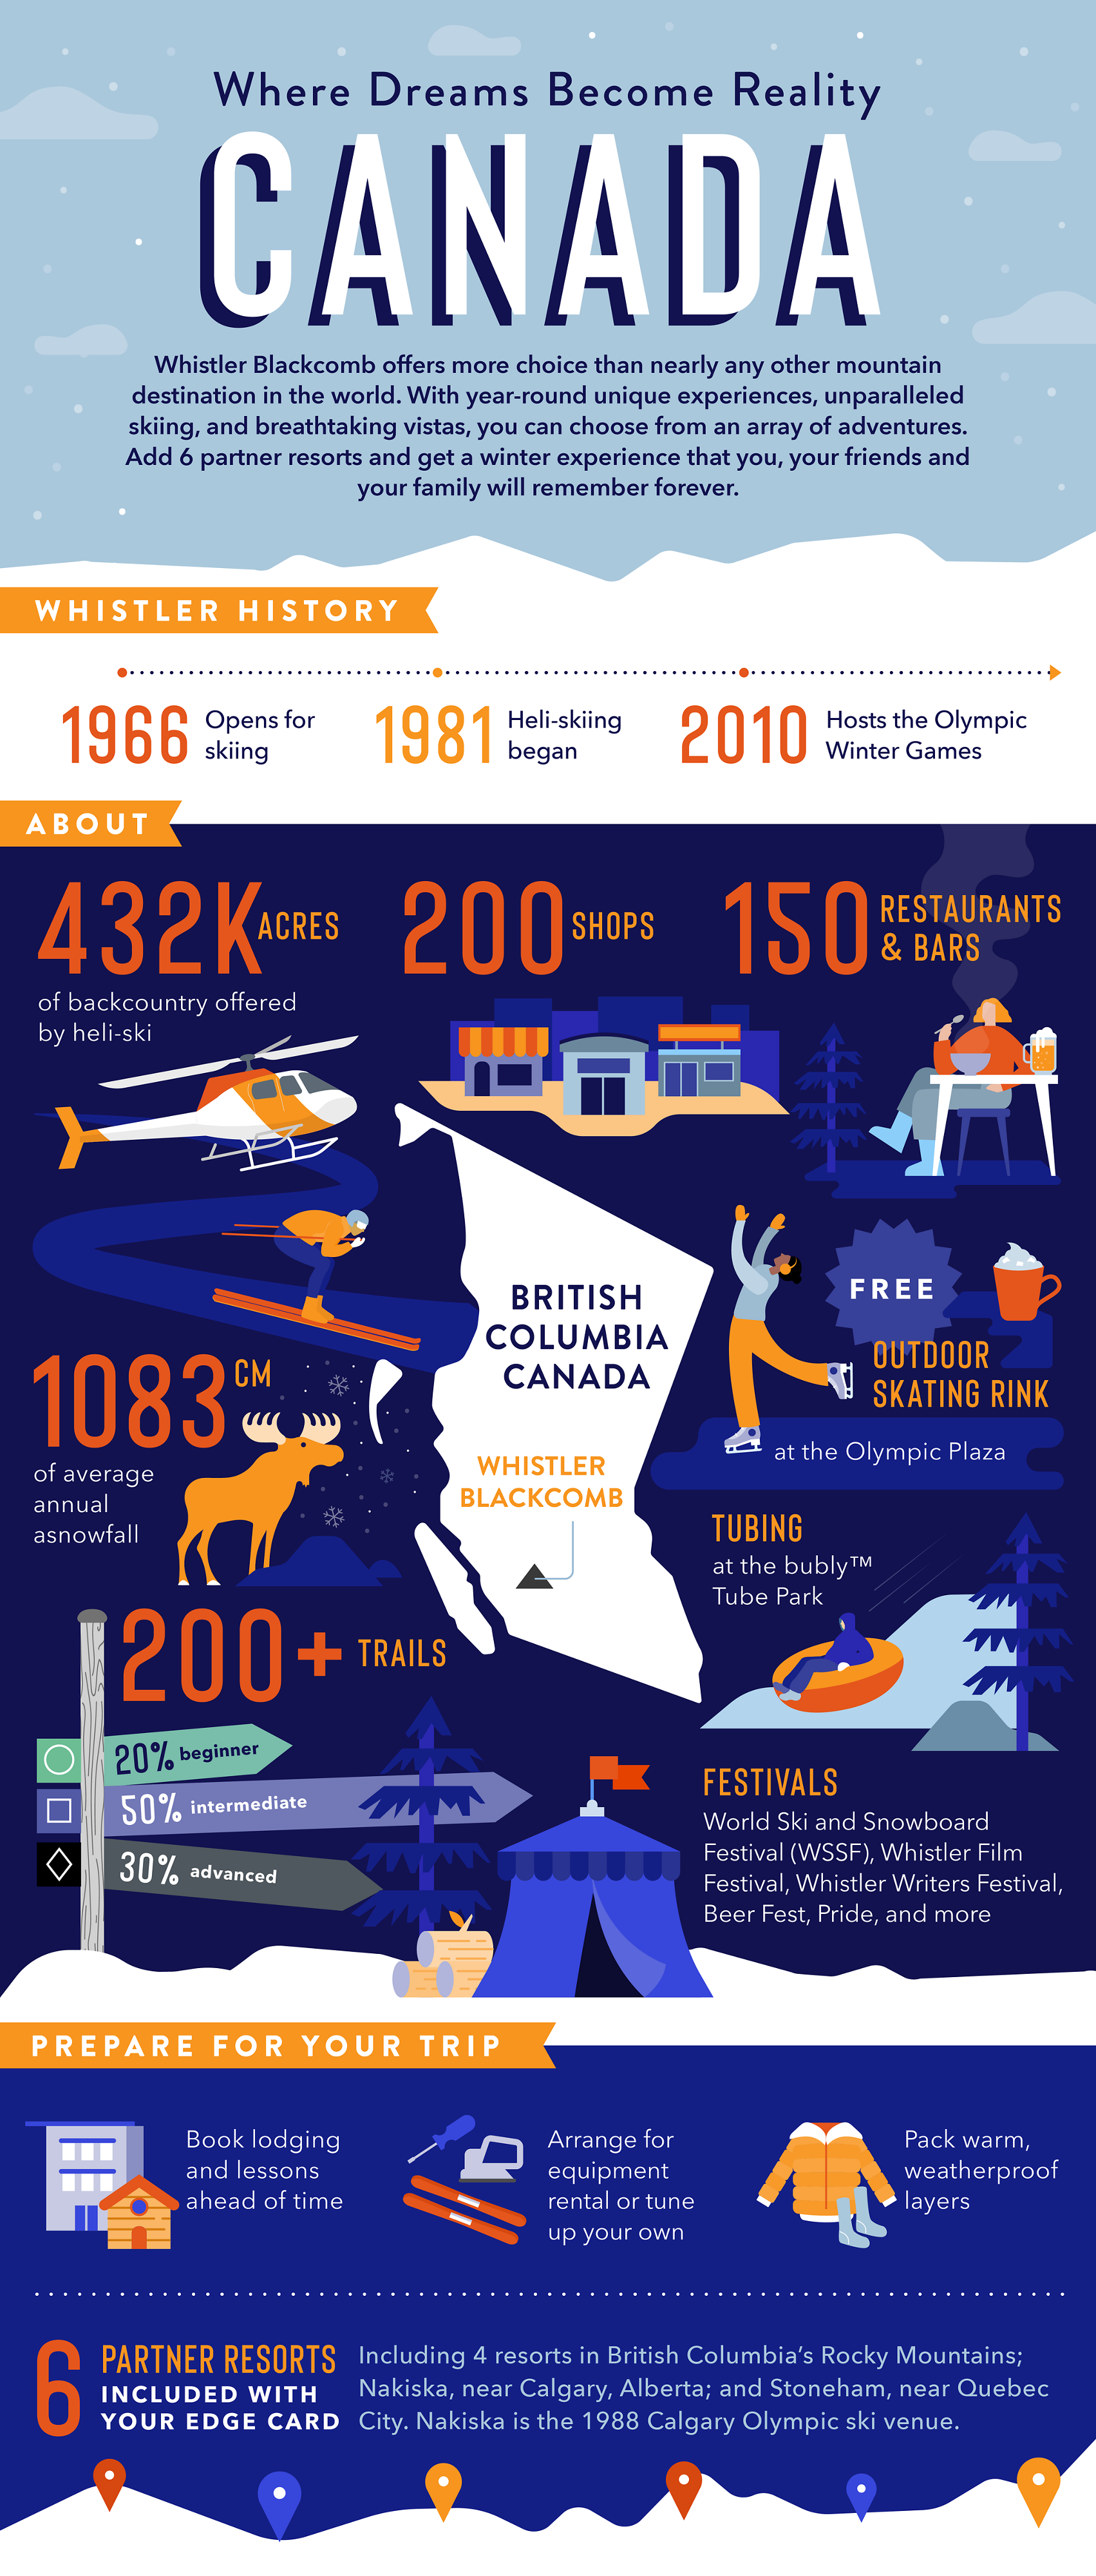 An infographic displaying key facts about the Canada region and what you can find in British Columbia. There is a free outdoor skating rink, 432k acres of skiable terrain accessible by heli-skiing, 200 shops and 150 restuarants and bars.